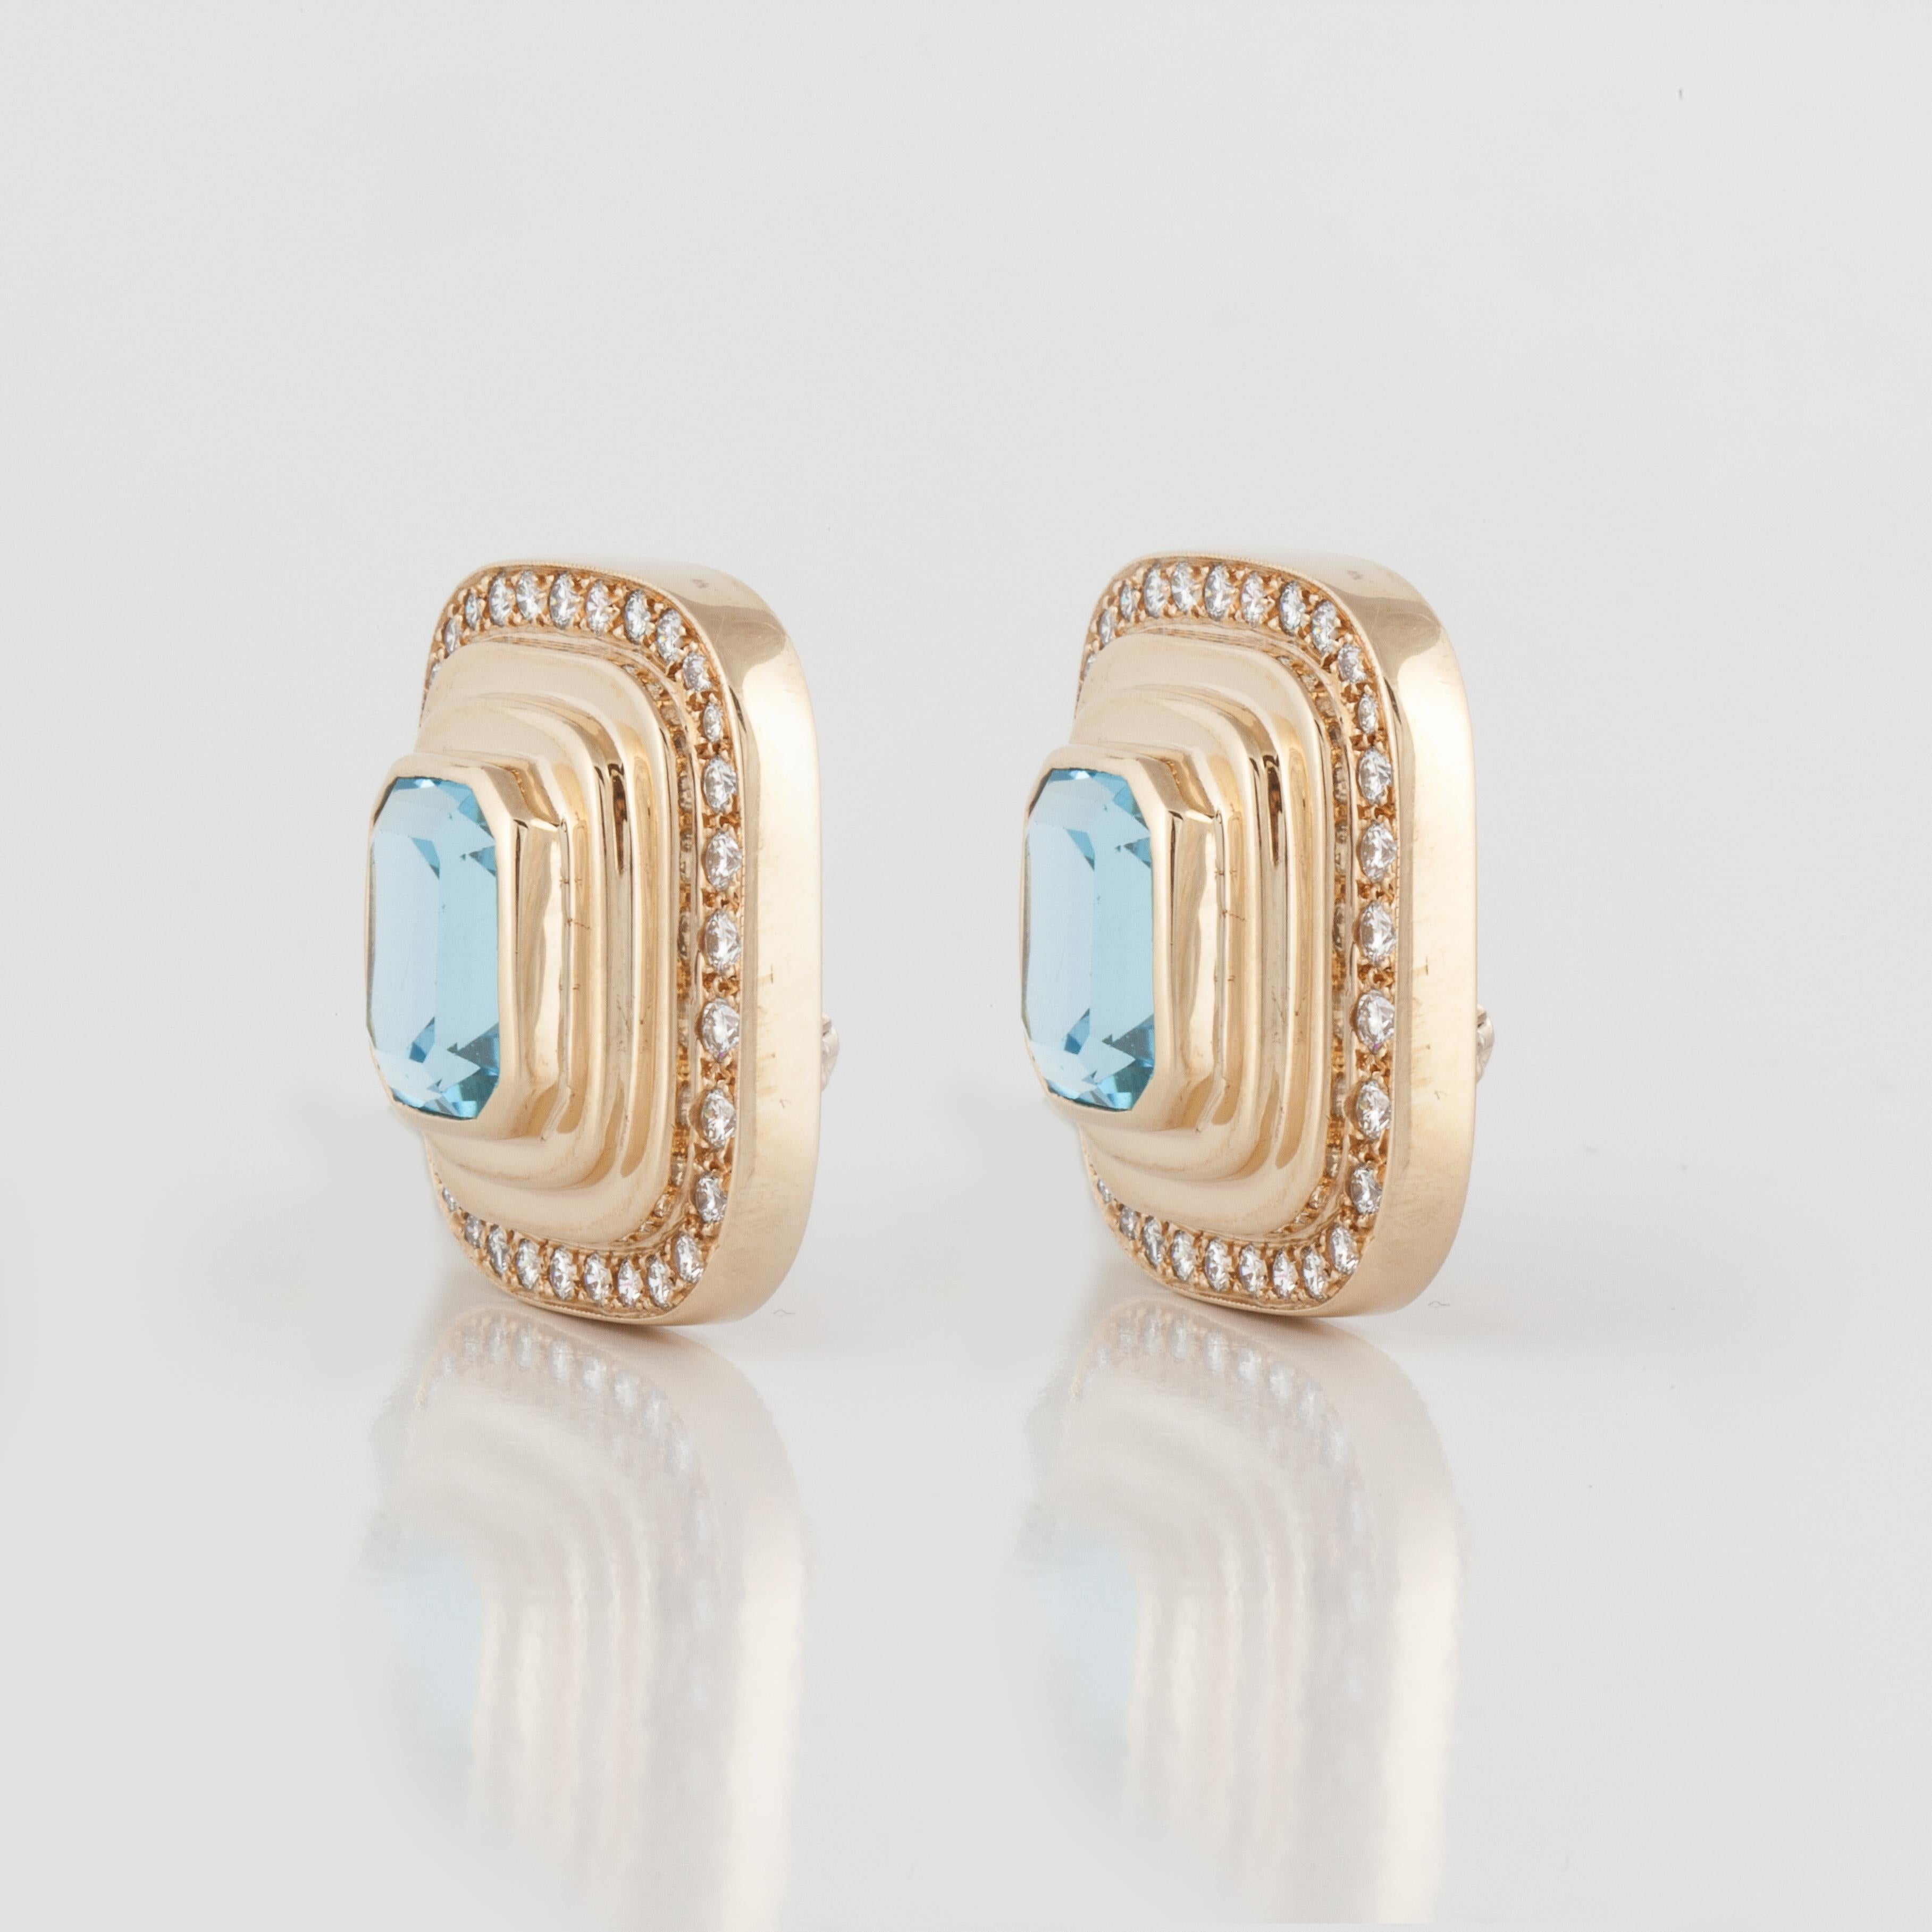 14K yellow gold earrings featuring blue topaz framed by round diamonds.  There are two (2) rectangular-cut blue topaz weighing 18 carats.  Framing the blue topaz are sixty-four (64) round diamonds totaling 2.60 carats; G-H color and VS clarity. 